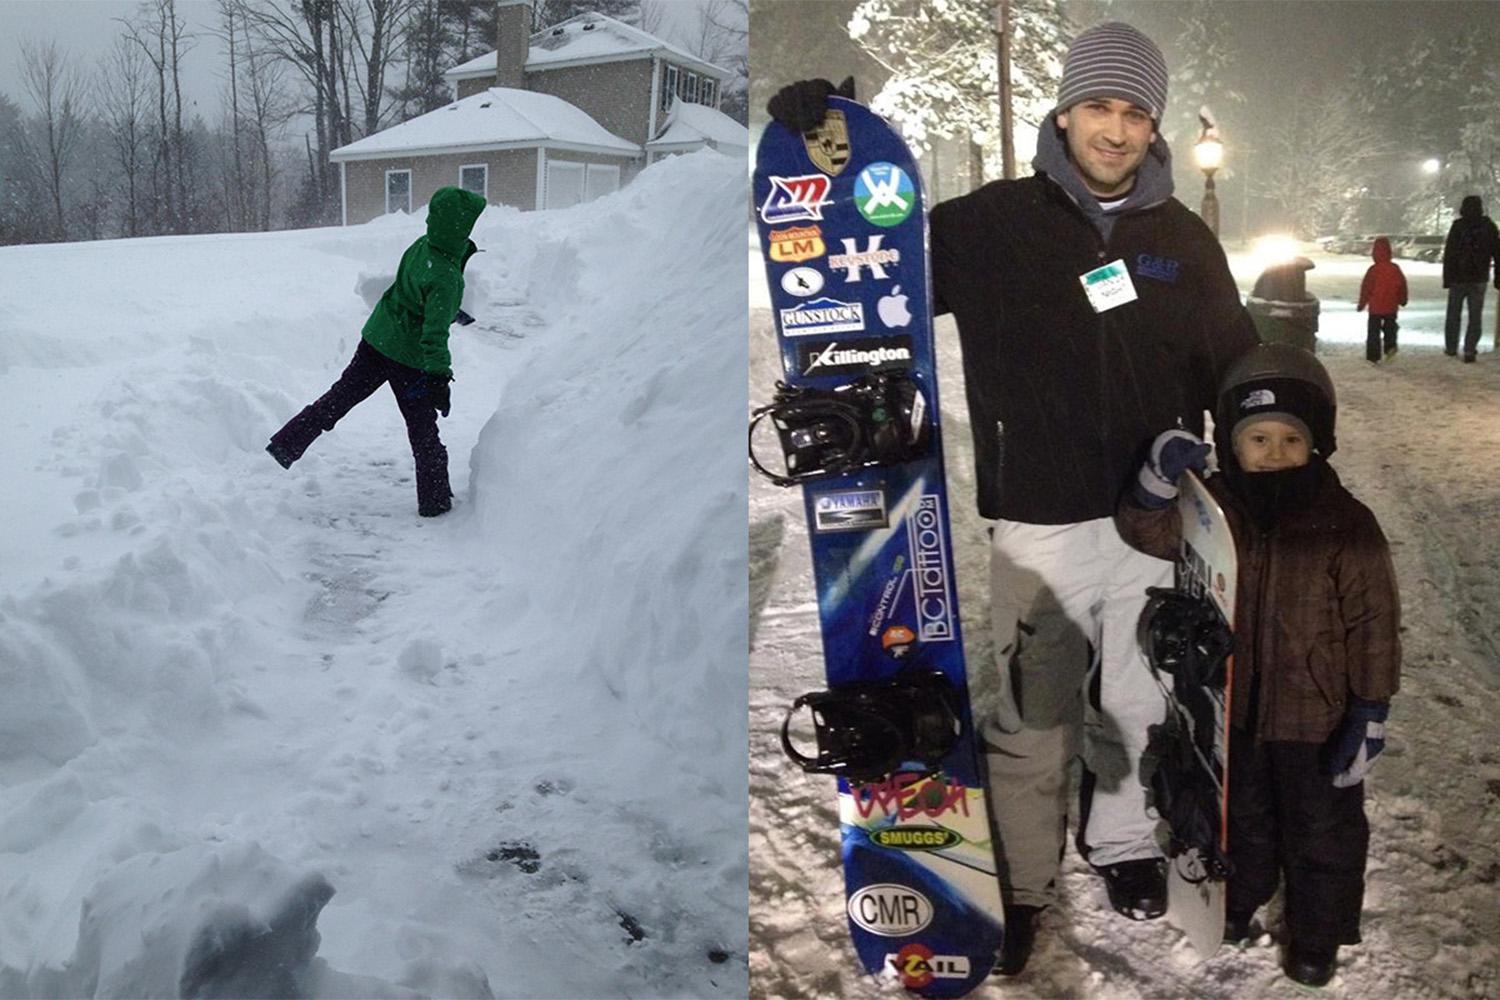 After spending 4 hours shoveling, Jason and his son, Nathaniel, took to slopes for some snowboarding.